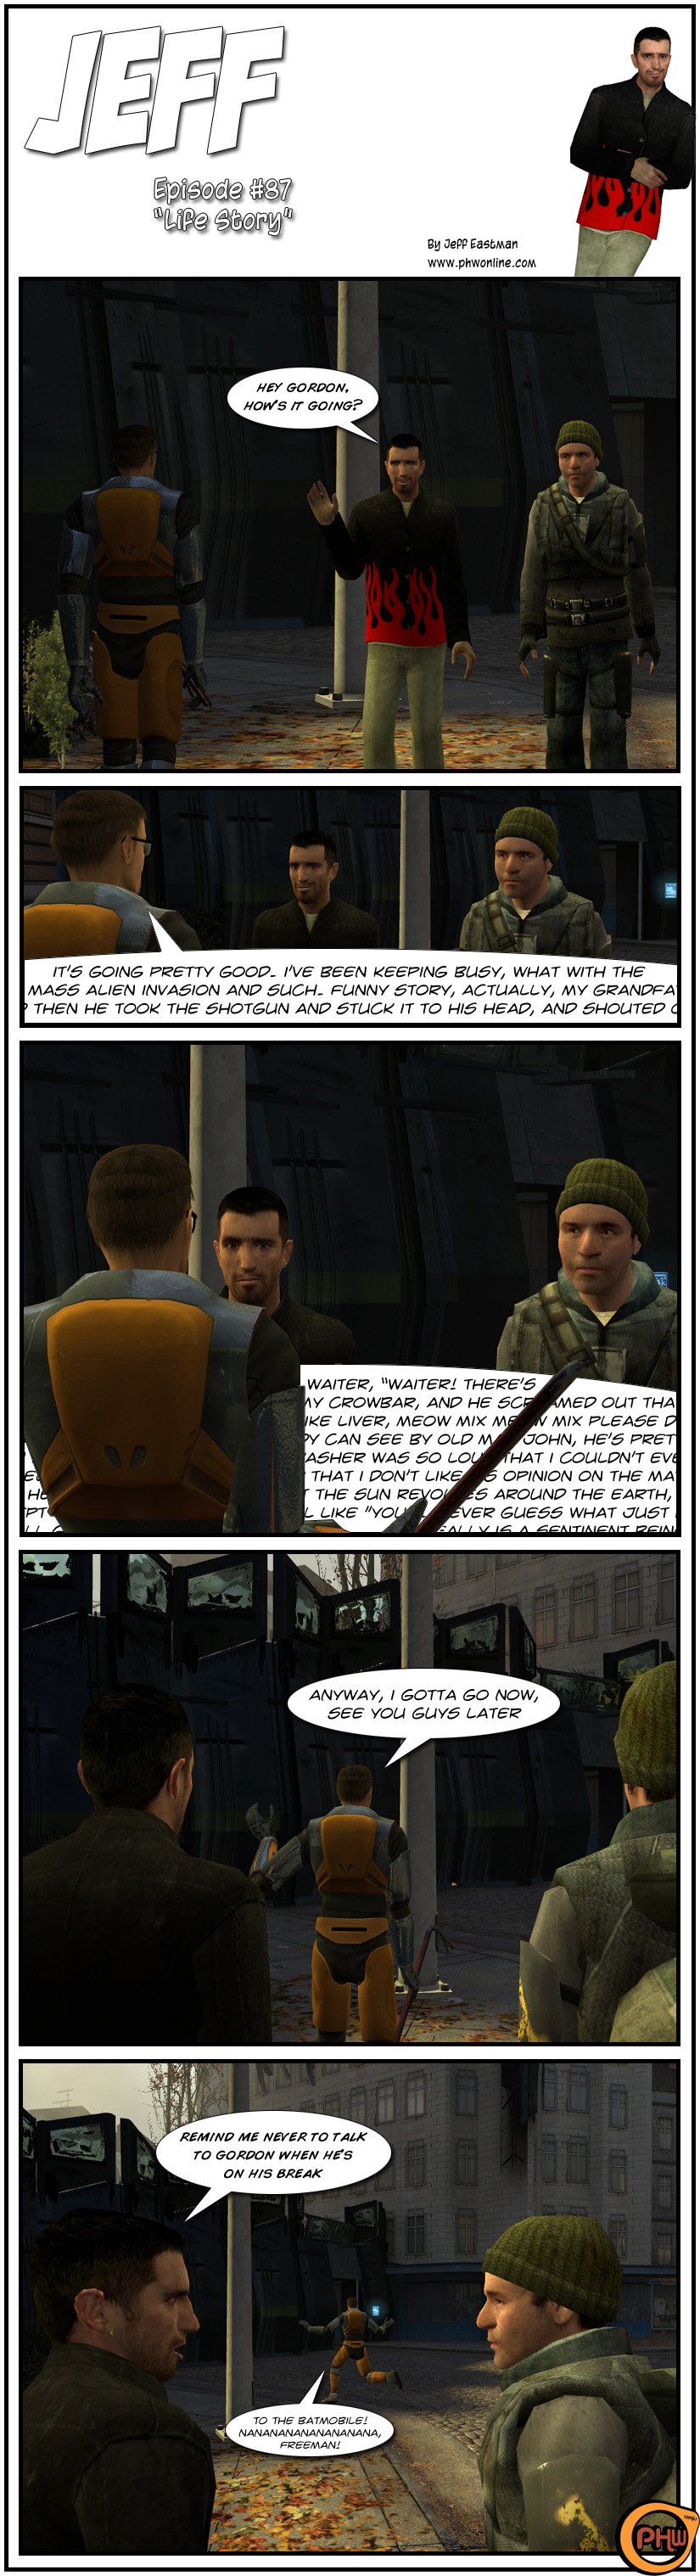 Jeff and Jerry are walking across the City 17 plaza when they find Gordon Freeman. Jeff greets Gordon and asks how it's going. Gordon Freeman starts going on a long tirade about the mass alien invasion, then getting sidetracked talking about his grandfather, and continues talking for ages as Jeff and Jerry listen, a bit surprised. Gordon then says he's gotta go and walks away with a goodbye. Jeff tells Jerry to remind him never to talk to Gordon when he's on his break, as Gordon says to the Batmobile and sings the Batman sixties' theme song. The end.